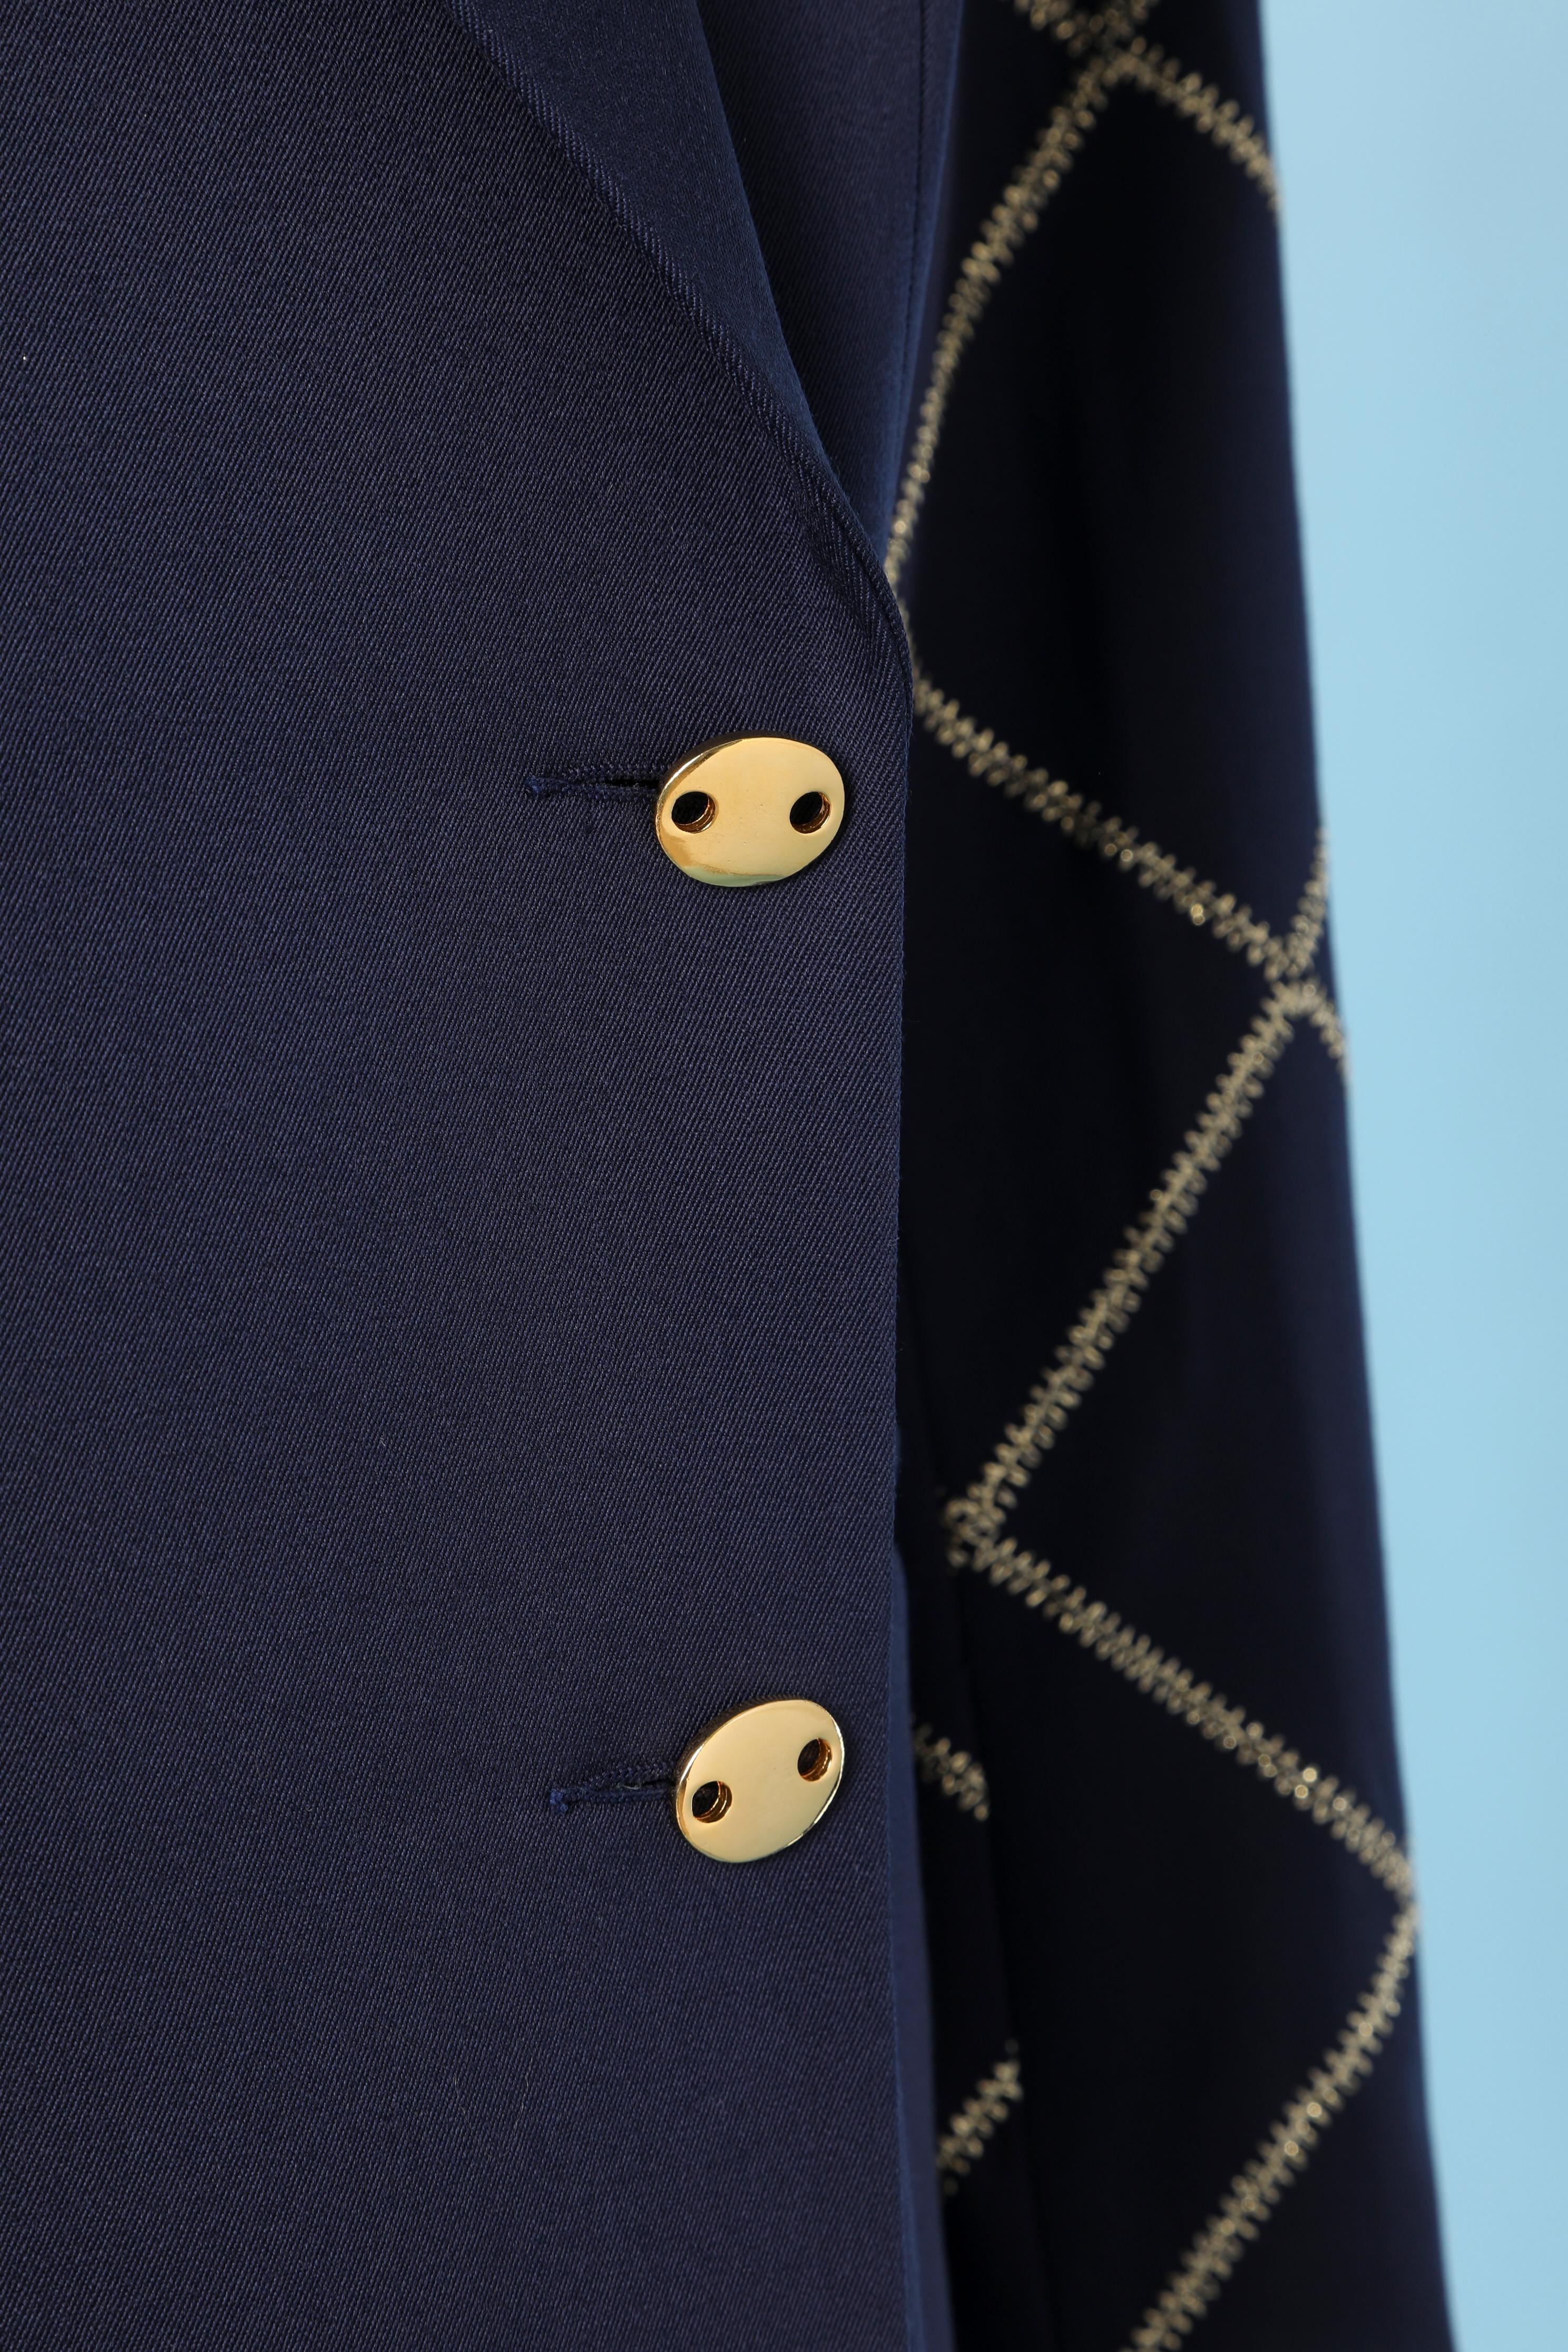 Black Navy blue wool double-breasted blazer with gold lurex top stiching Paco Rabanne  For Sale